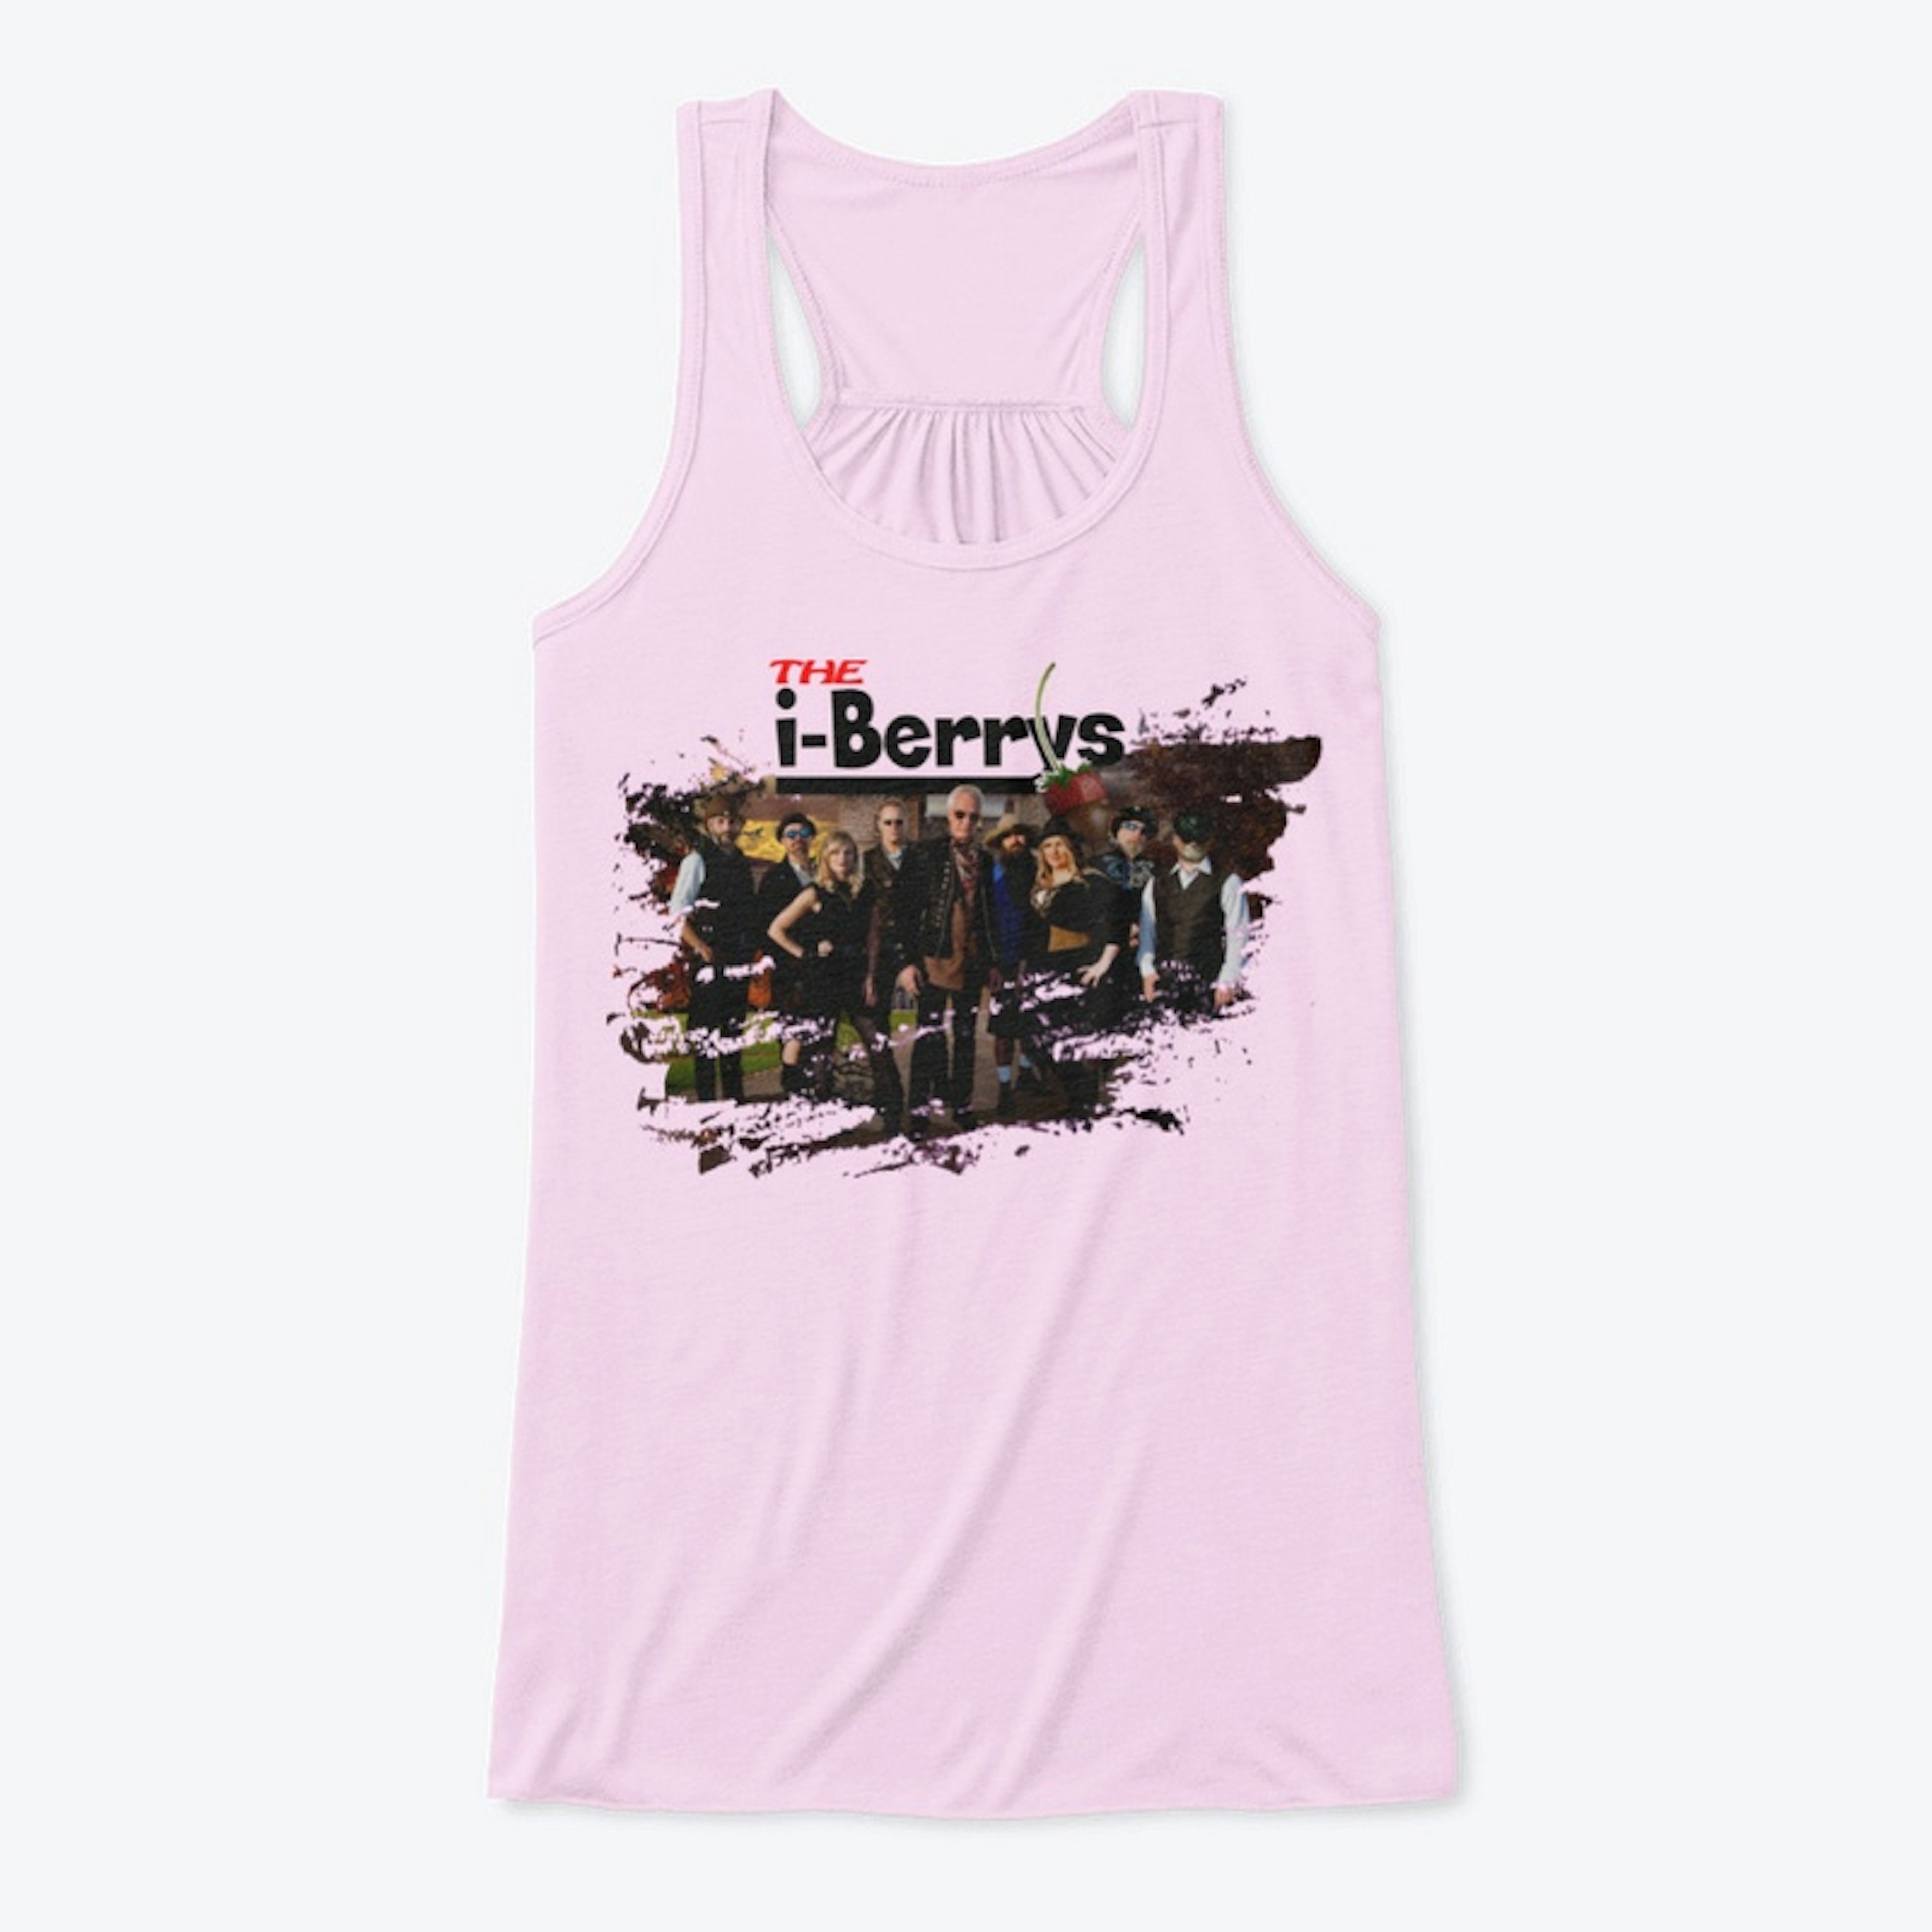 Women's Tank with Group photo